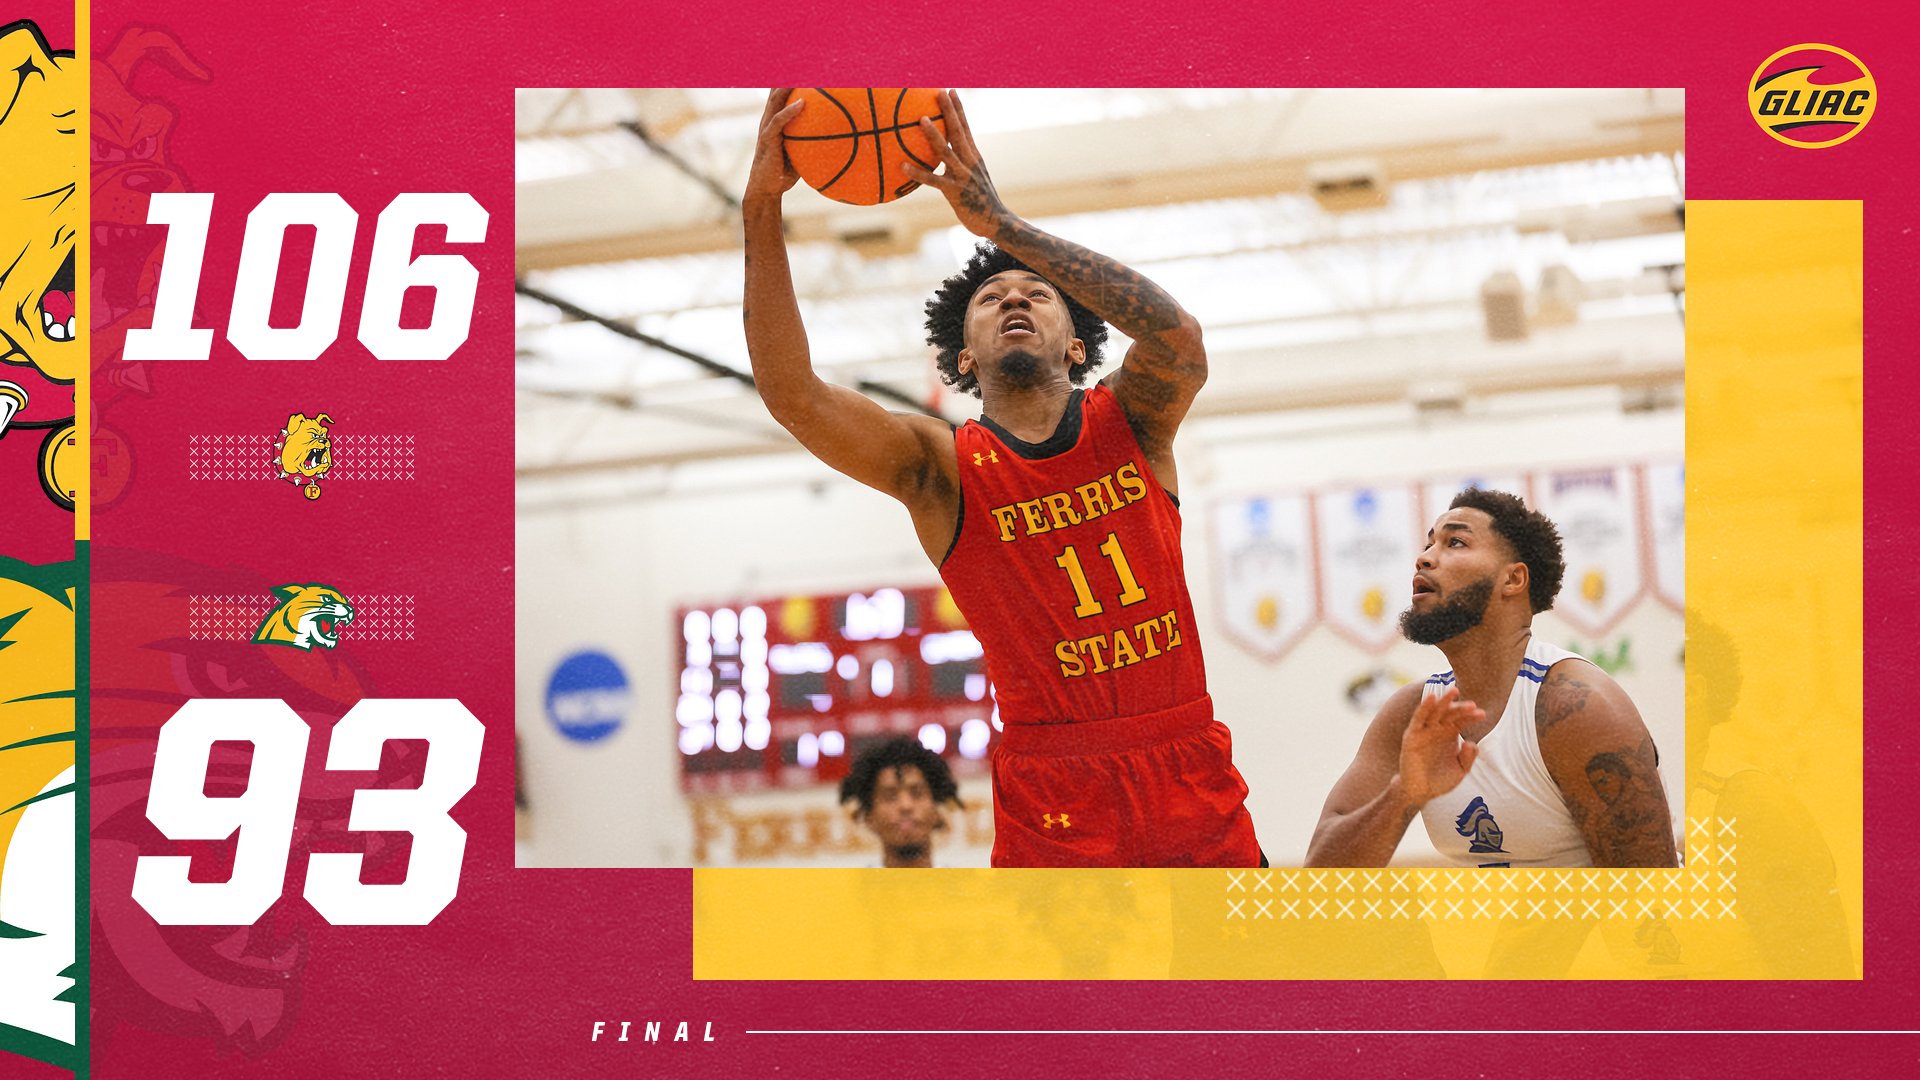 Ferris State Rallies Back For Dramatic Overtime Win Over Northern Michigan In First-Place Battle